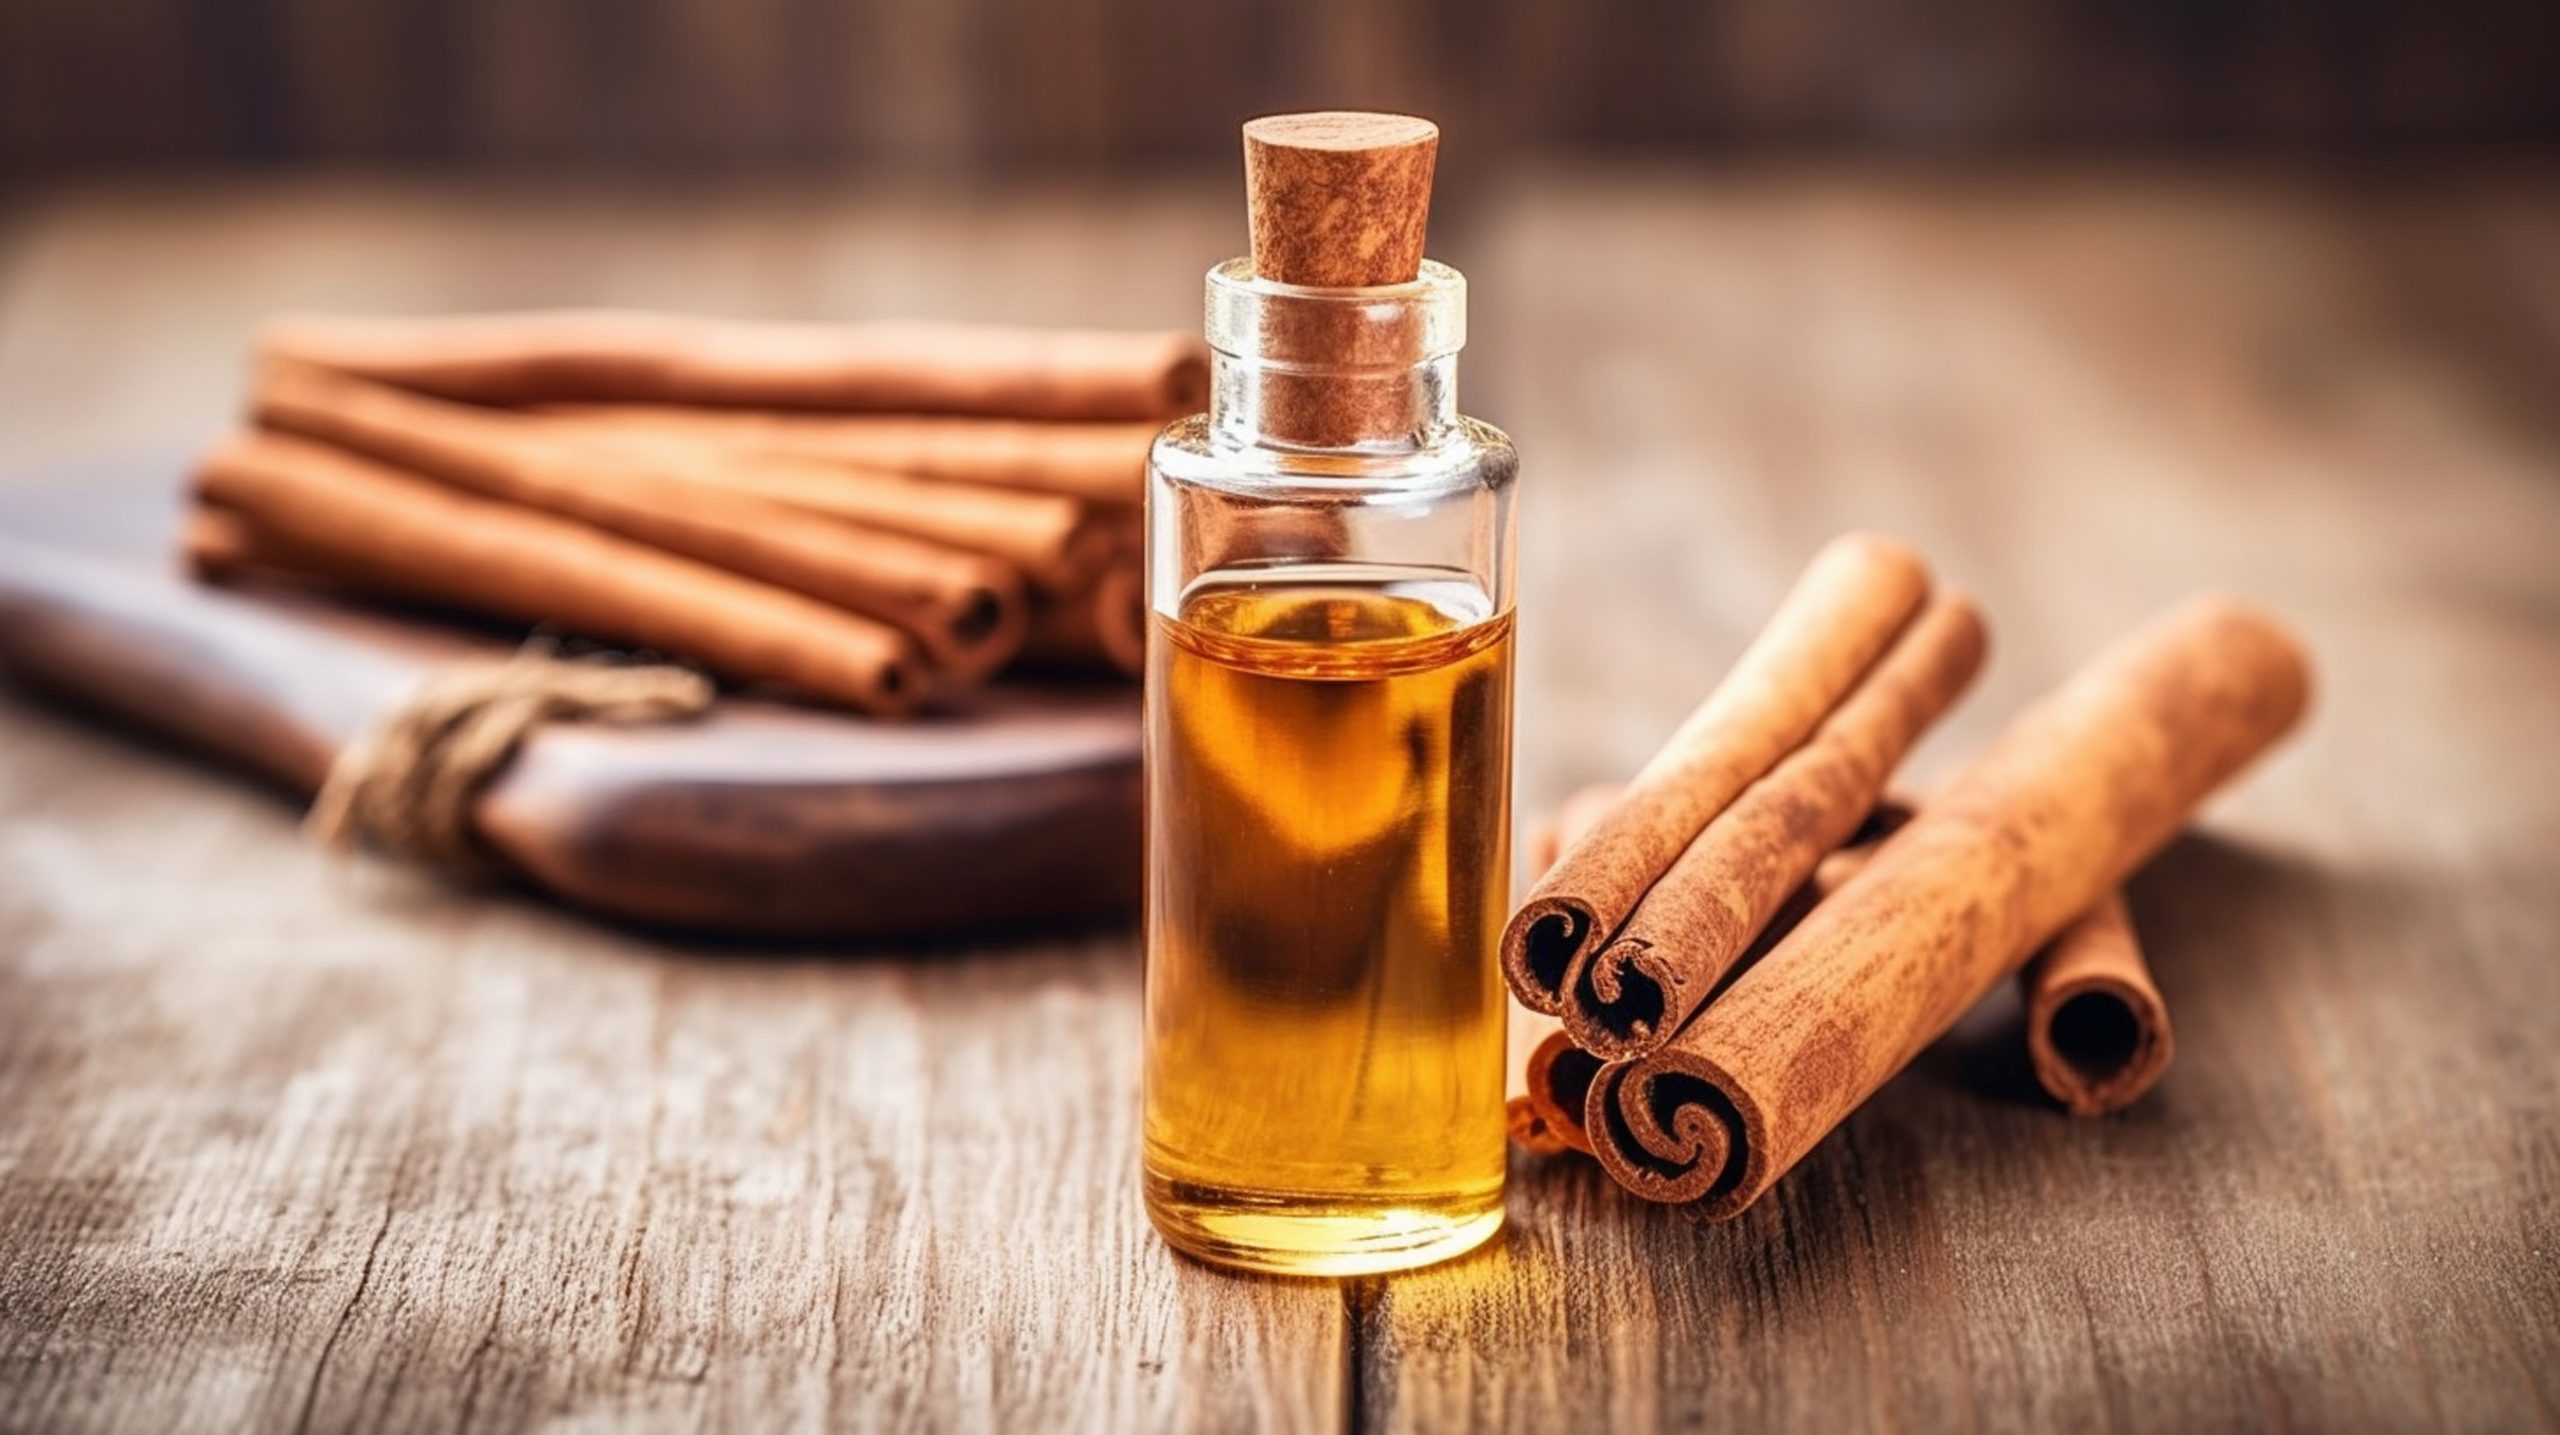 Benefits and Applications of Cinnamon Oil: Health and Beauty